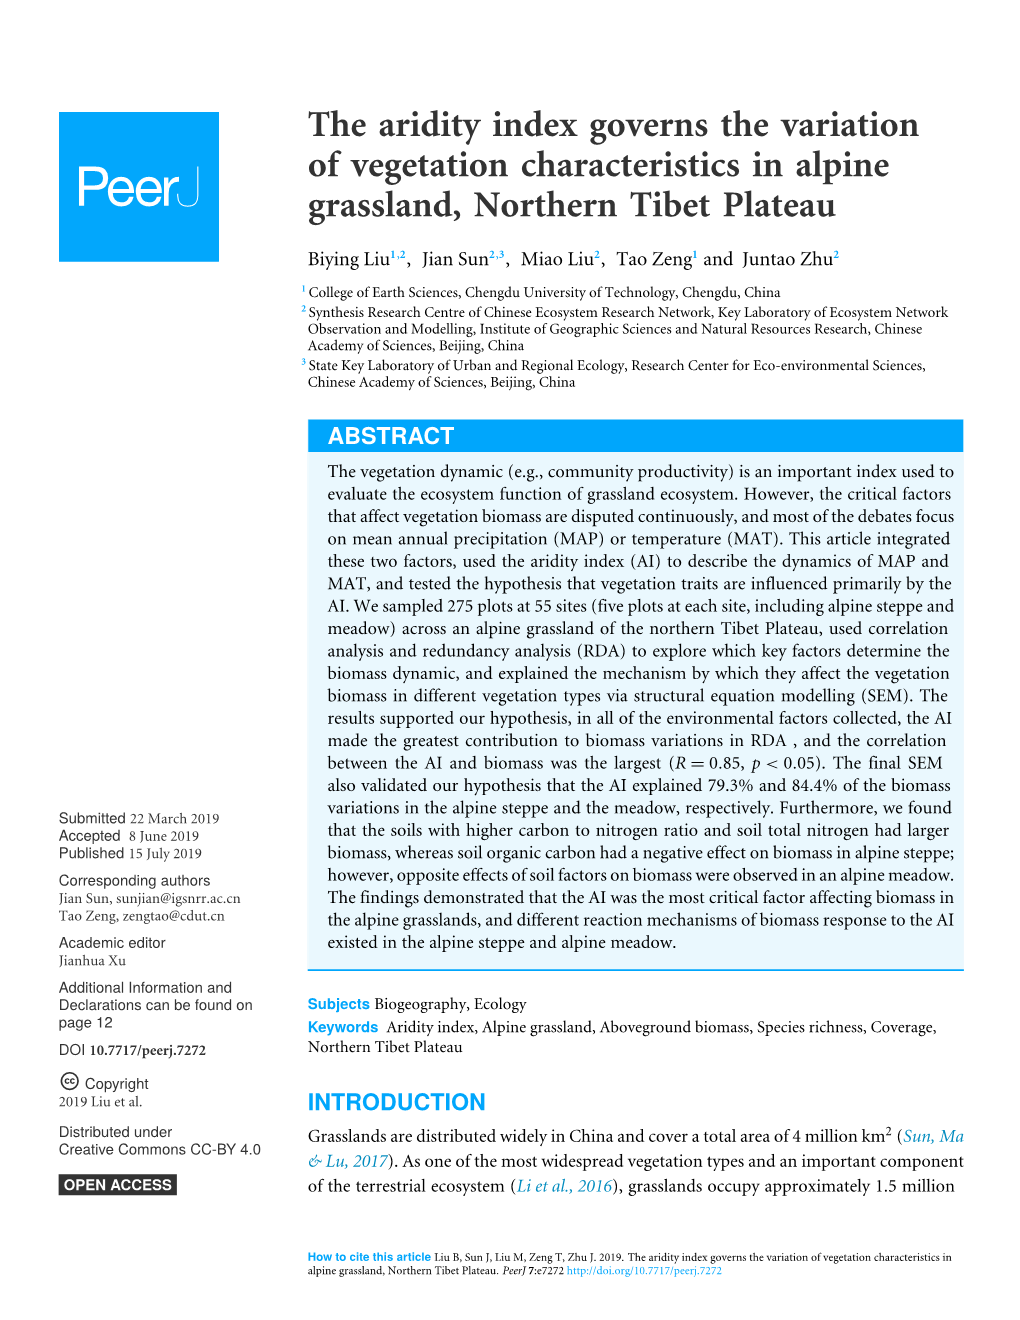 The Aridity Index Governs the Variation of Vegetation Characteristics in Alpine Grassland, Northern Tibet Plateau